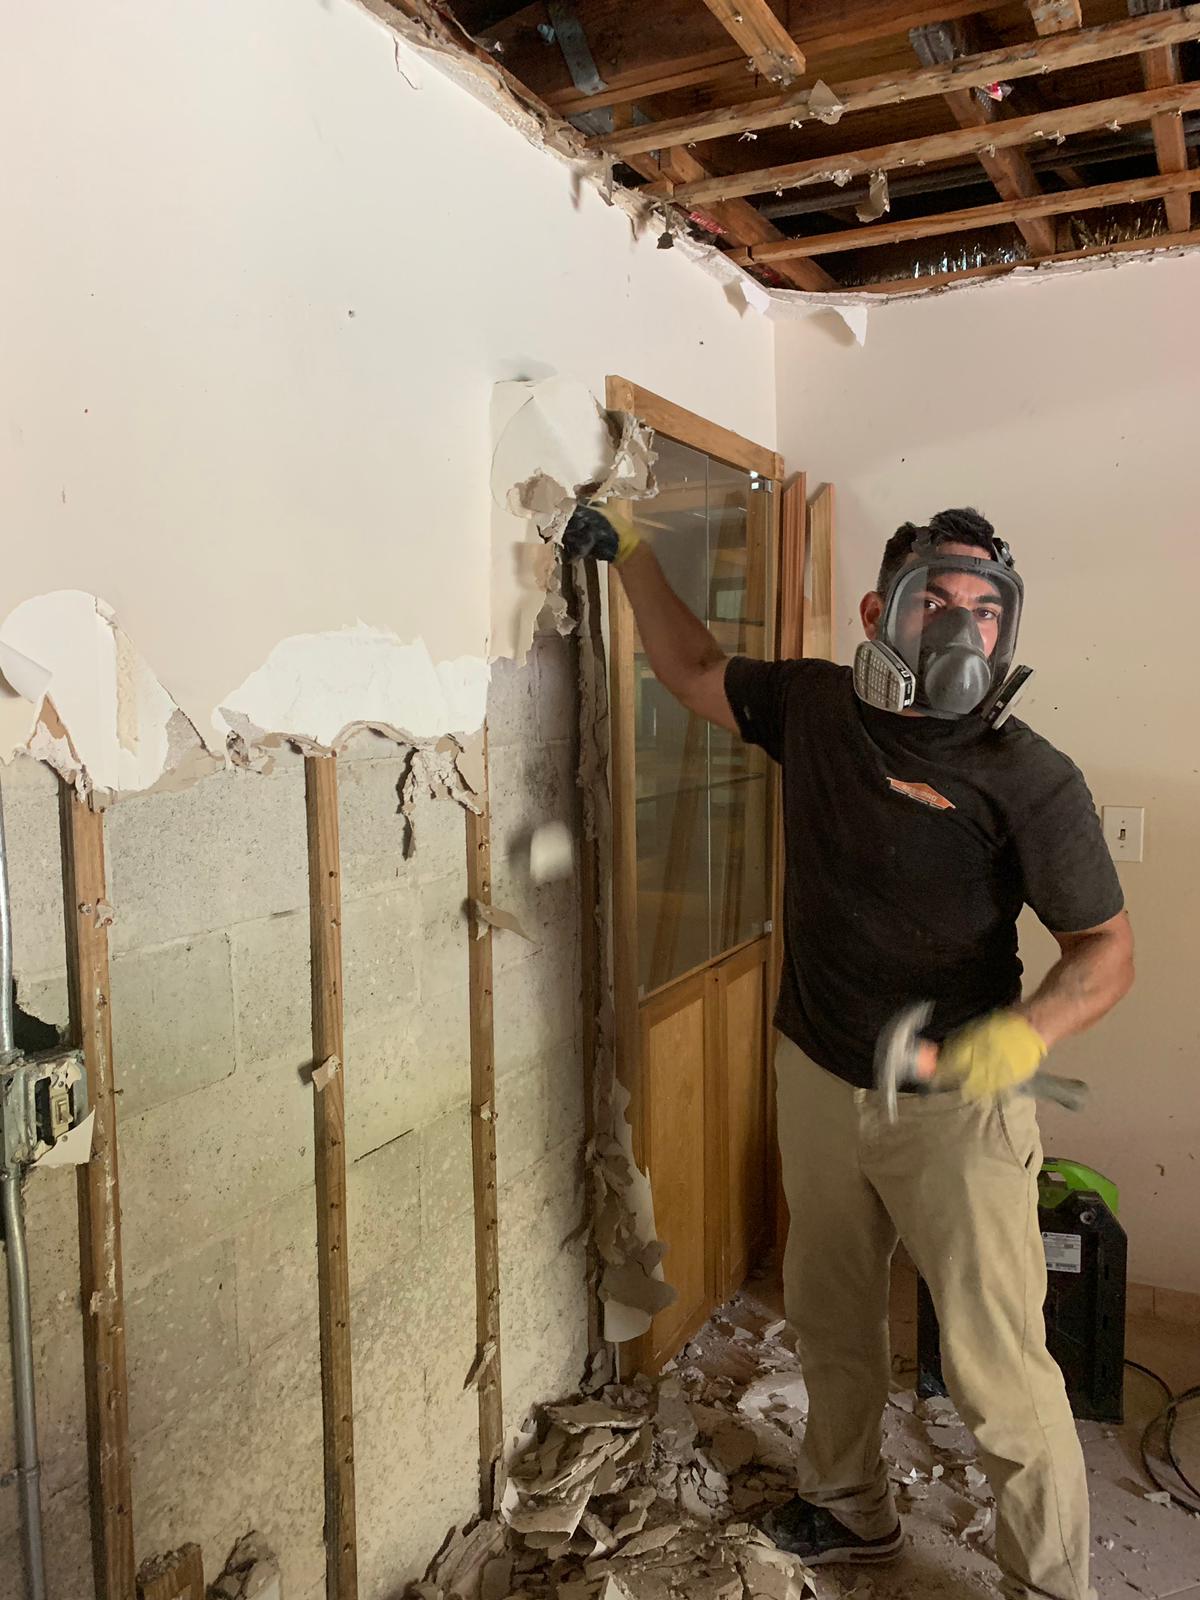 Mold remediation in a workspace.